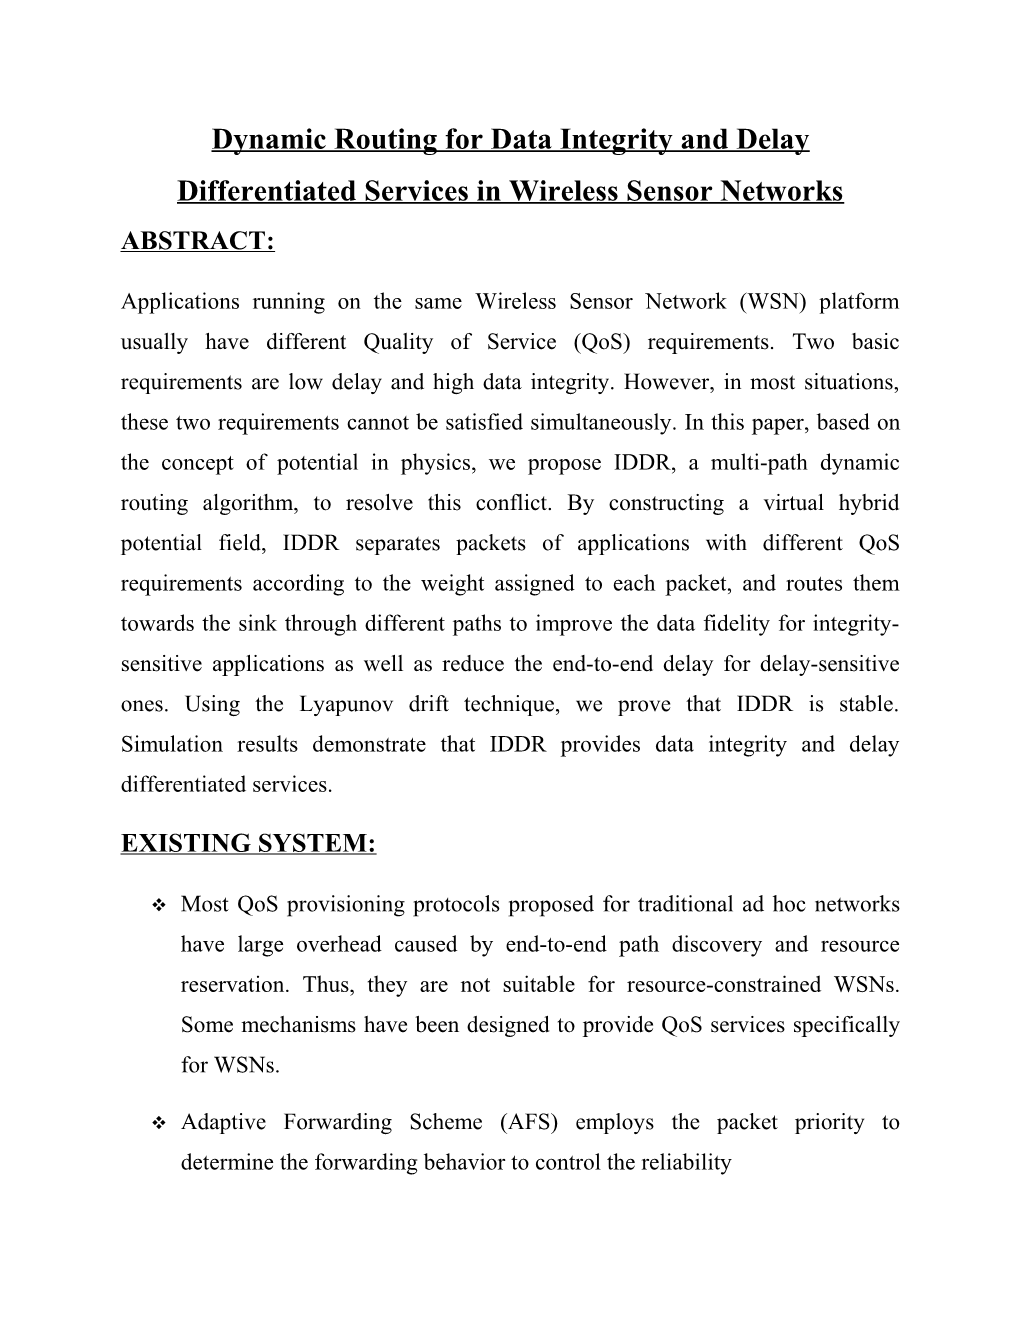 Dynamic Routing for Data Integrity and Delay Differentiated Services in Wireless Sensor Networks